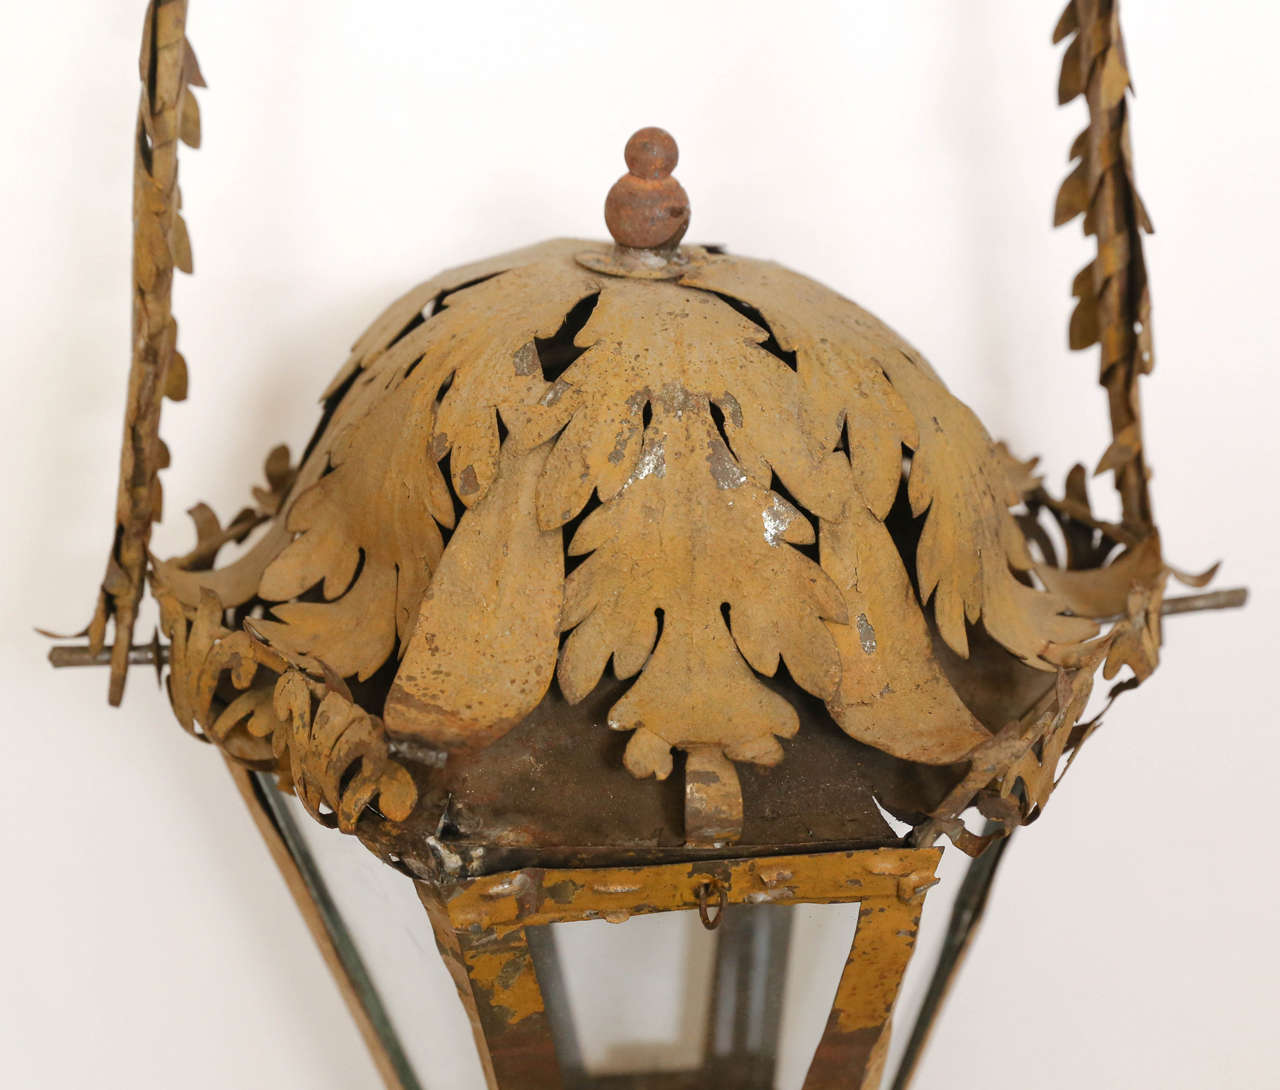 Spanish Processional Lantern from Spain